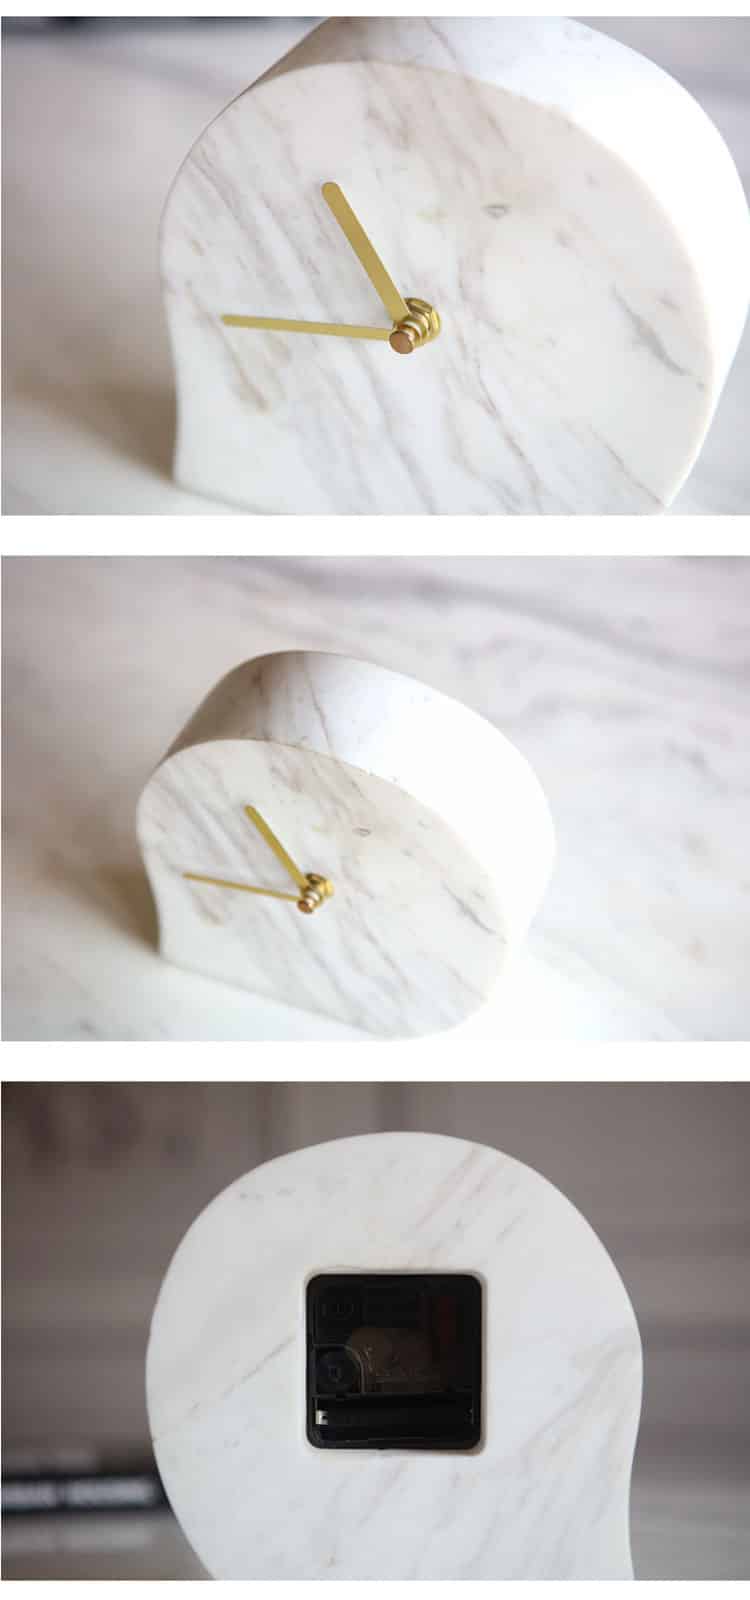 Modern Model Room Hotel Project Home Living Room Study Soft Decoration Ornaments Natural Marble Water Drop Shape Desk Clock